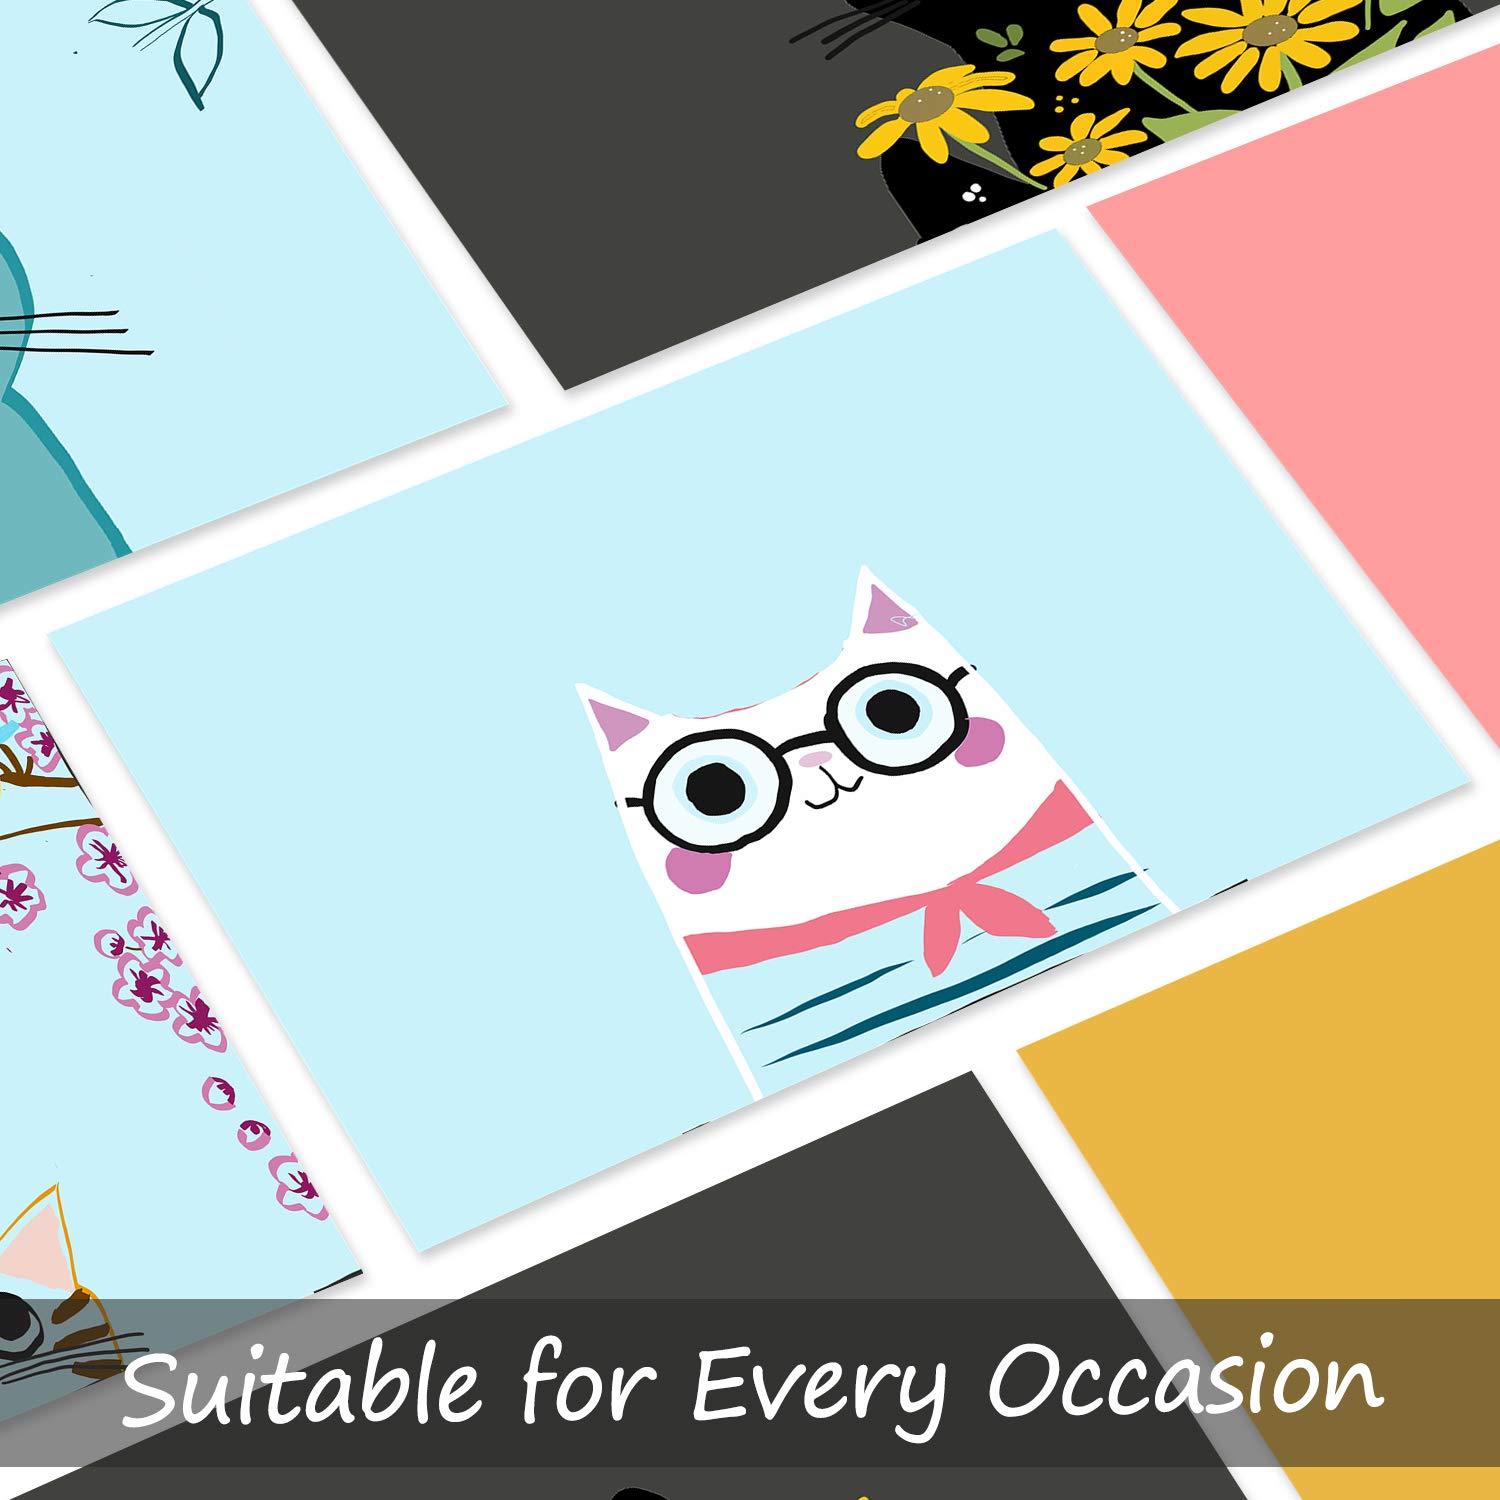 36 Blank Greeting Cards With Envelopes - Cute Cat Bulk Note Cards Stationery Box Set For All Occasions Birthday Thank You and Just Because